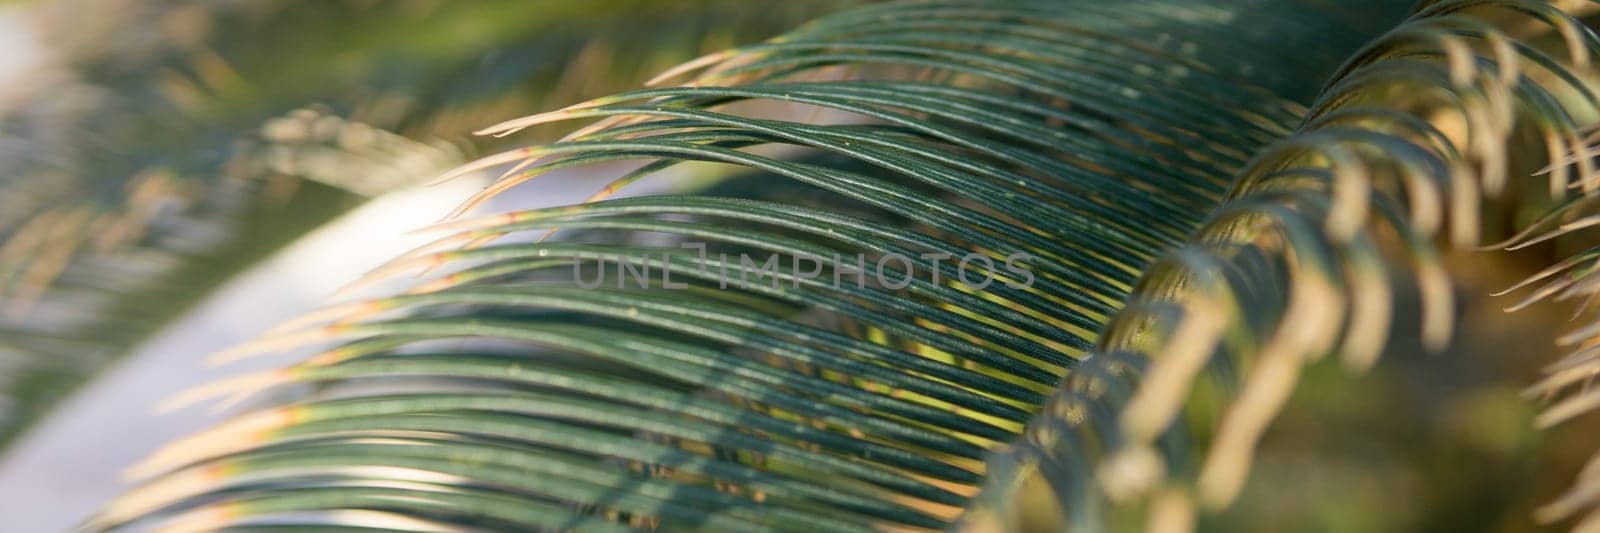 Green palm leaves, natural background. by Annu1tochka